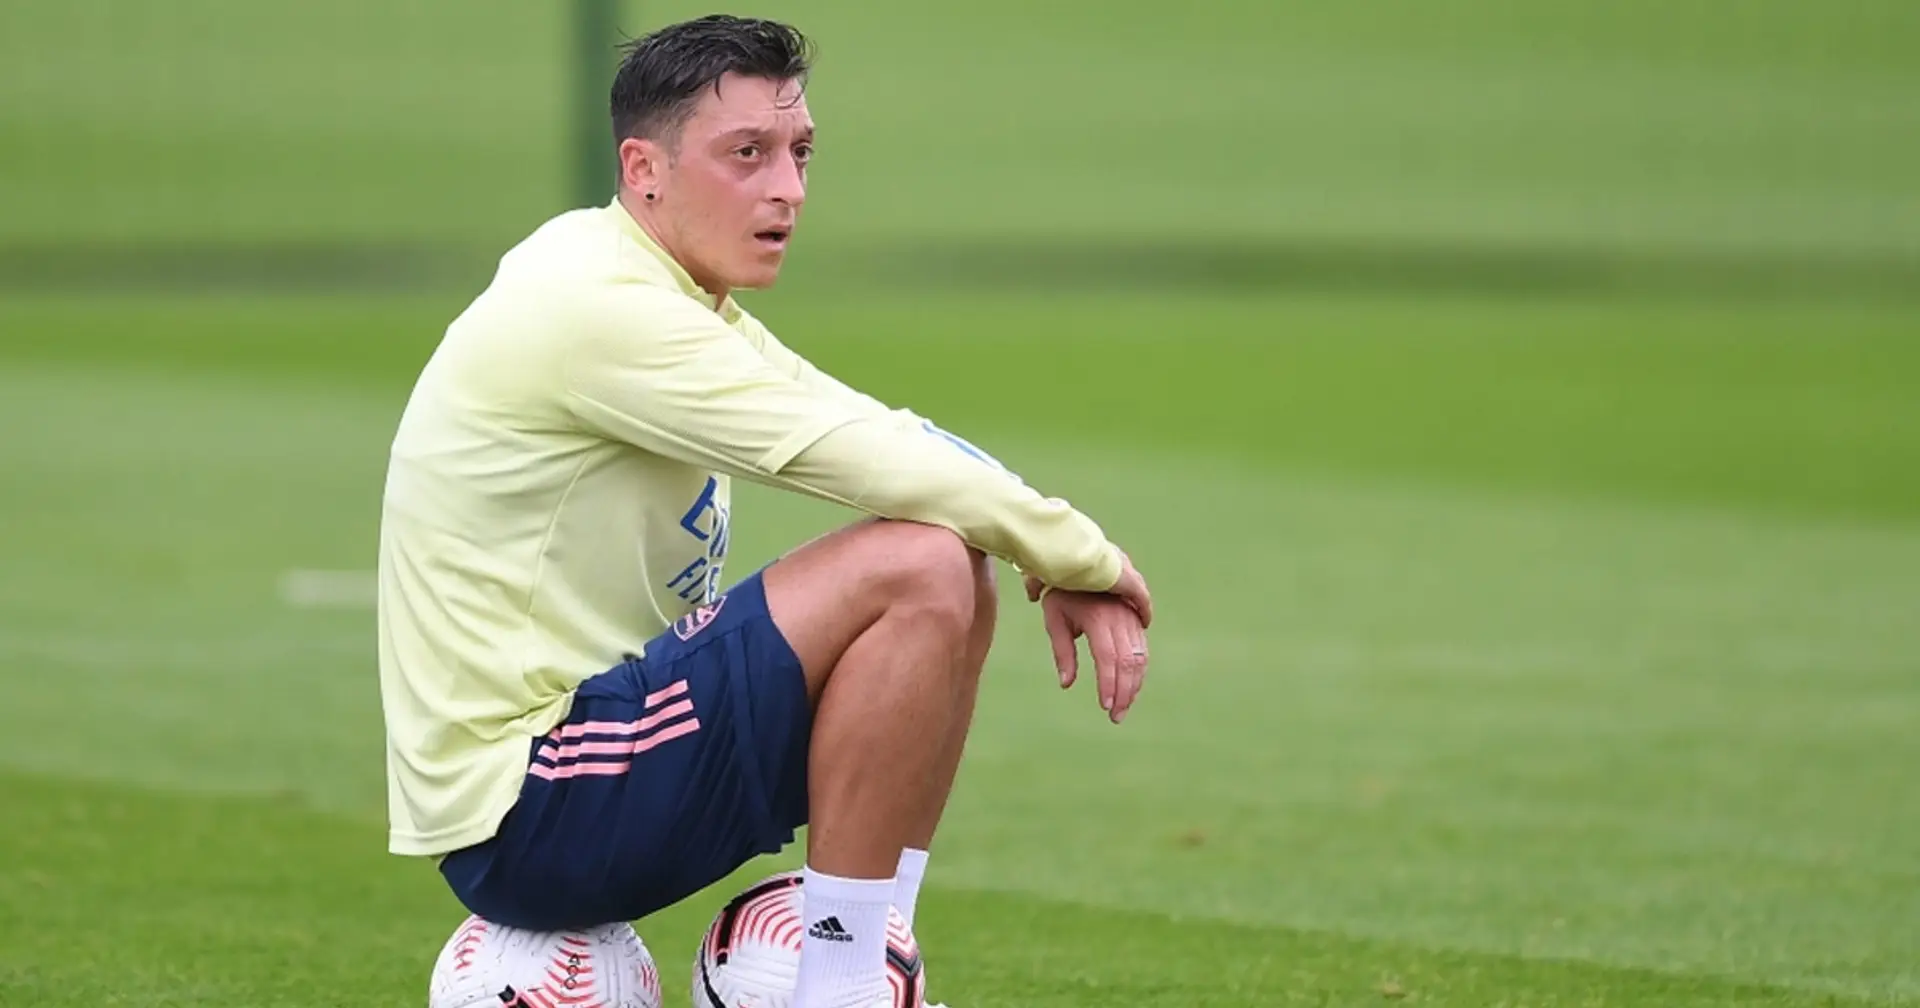 Arsenal not willing to pay any part of Ozil's salary should he leave this January (reliability: 5 stars)